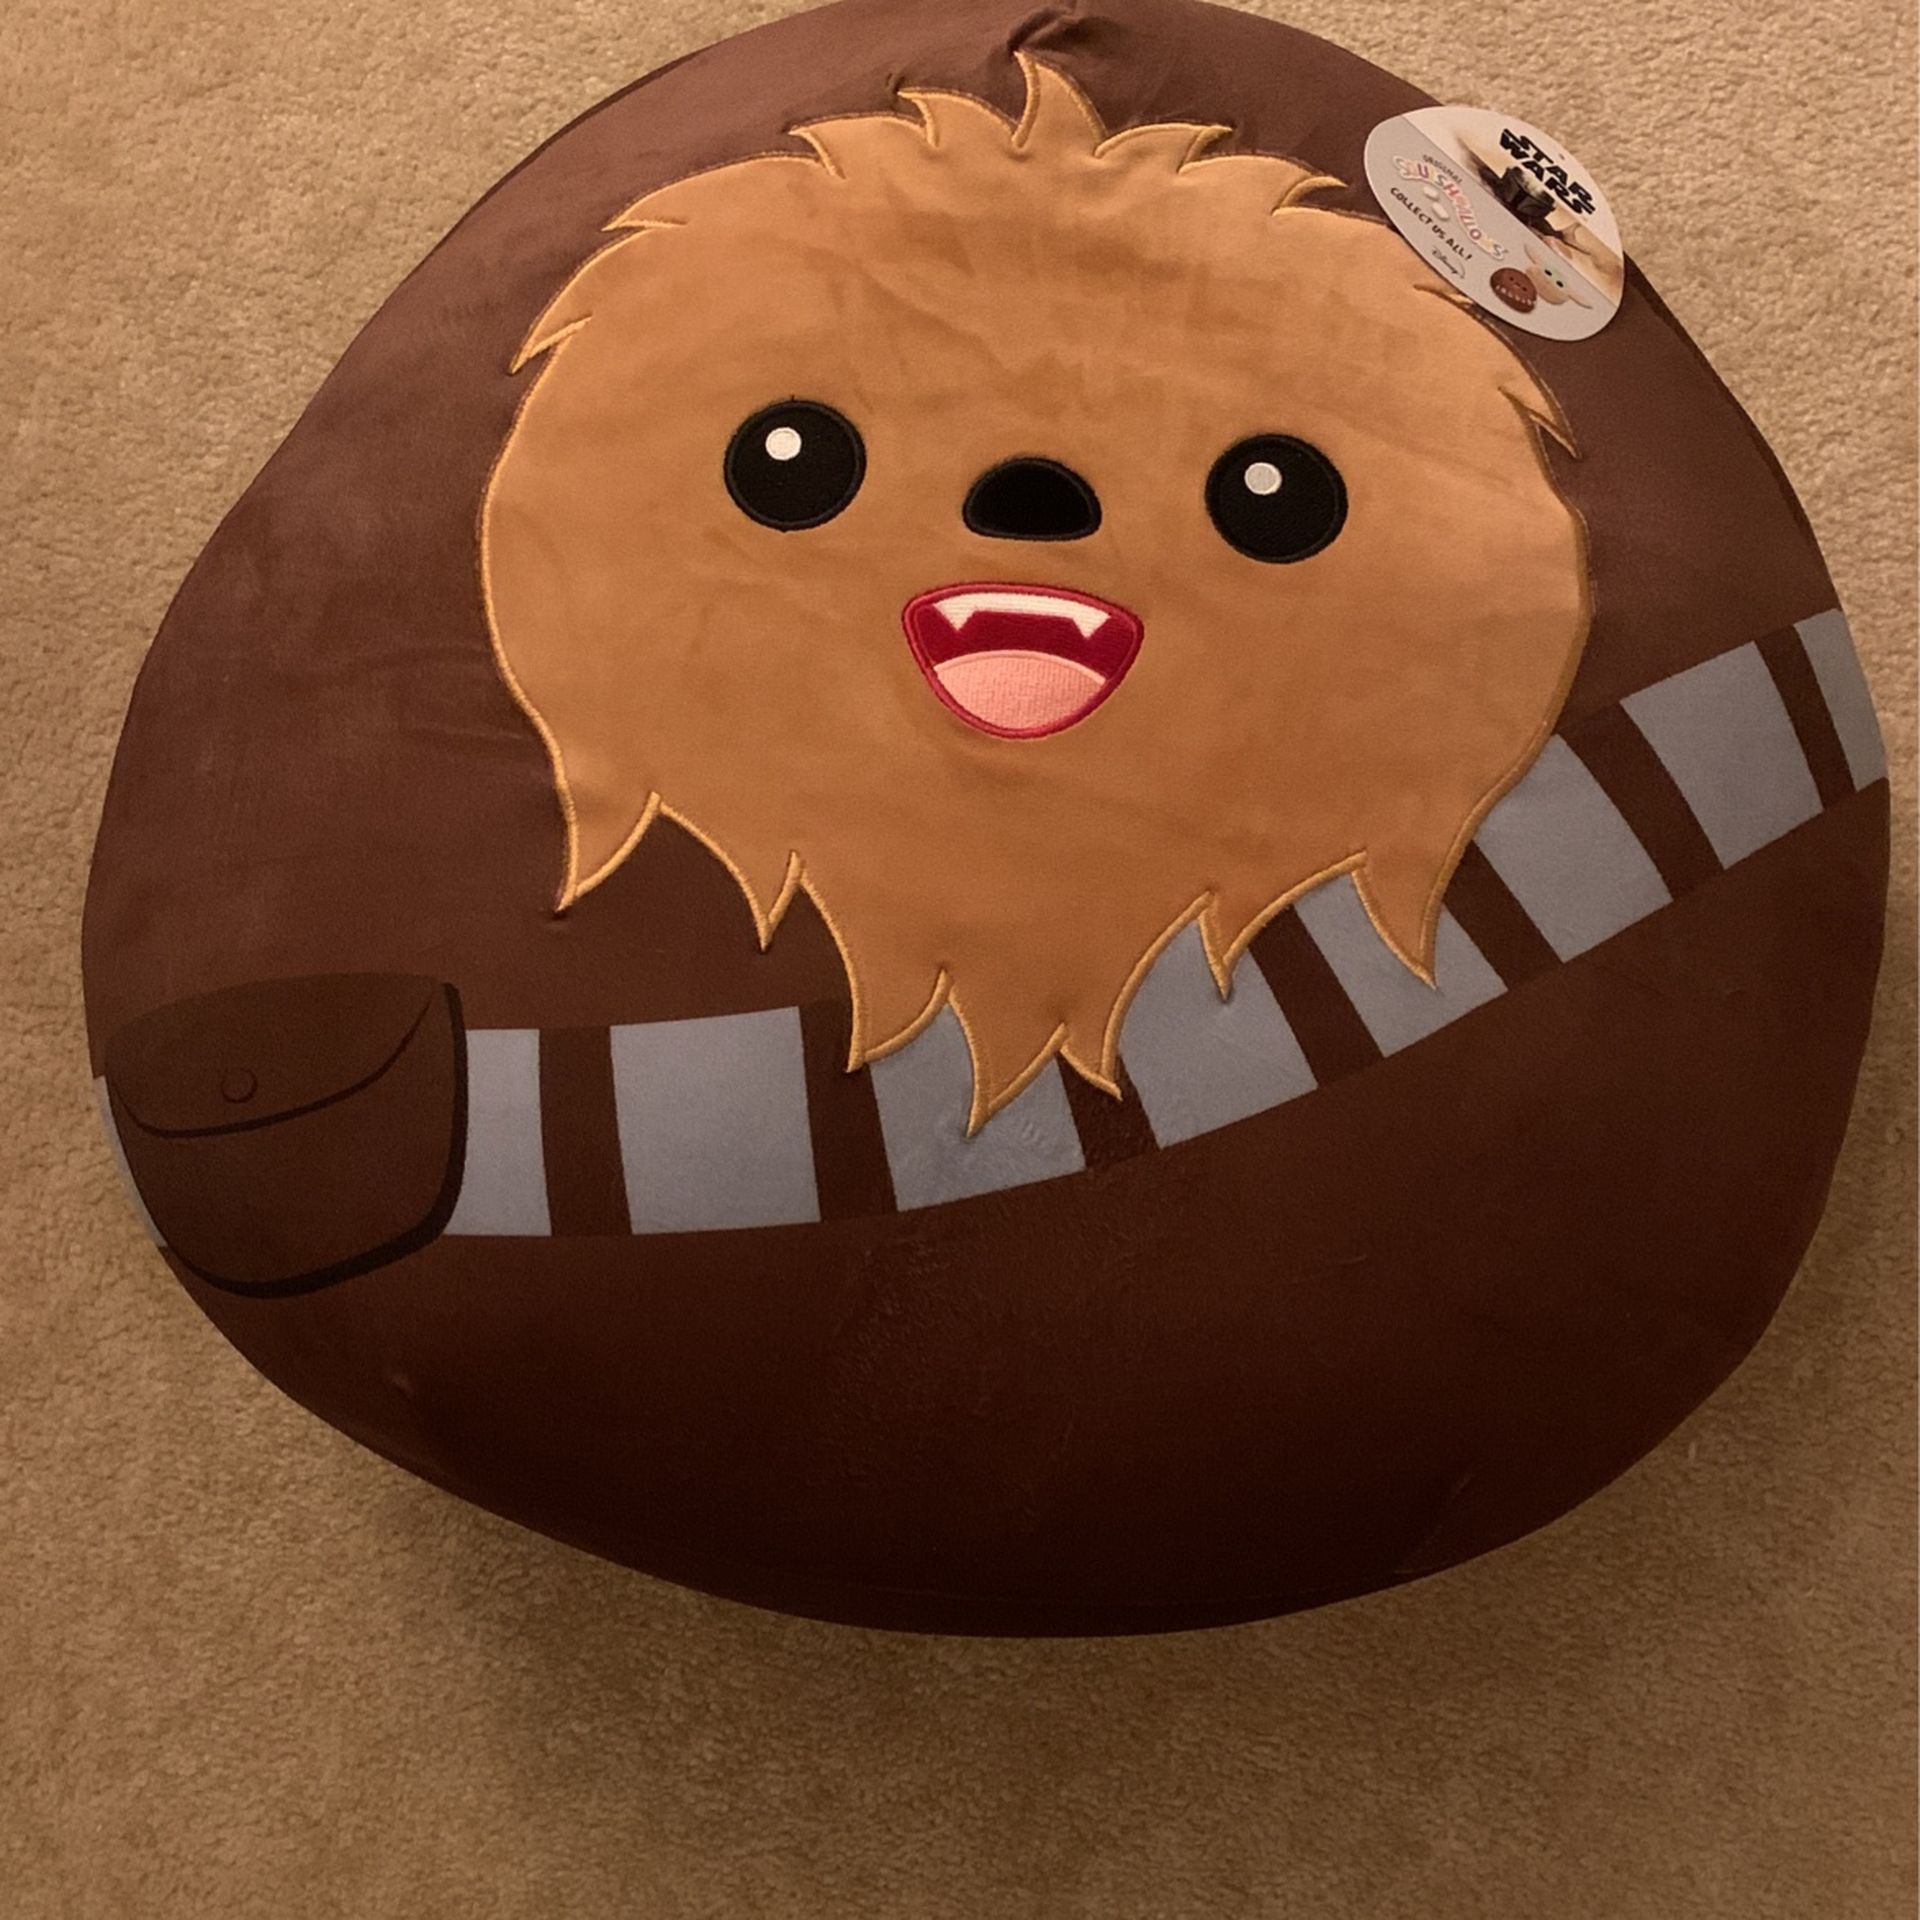 NEW - SQUISHMALLOWS Star Wars Chewbacca 20inch Plush Stuffed Toy - Brand New, Never Used